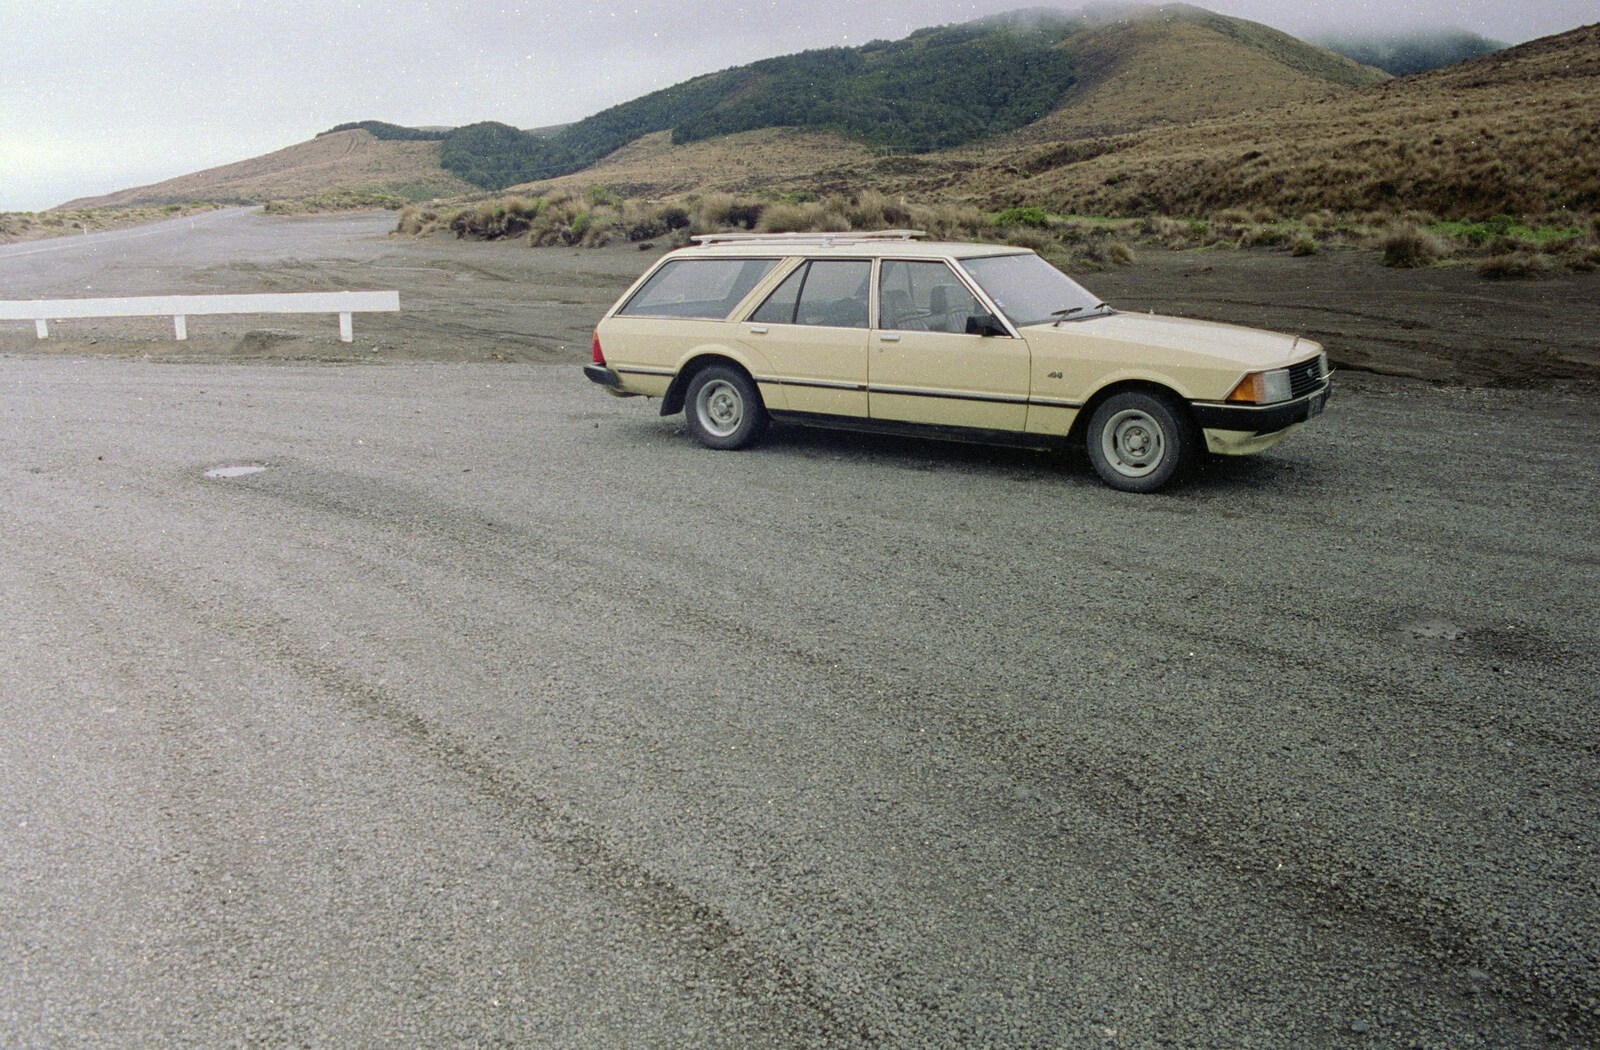 The Ford Falcon up in the desert from A Road-trip Through Rotorua to Palmerston, North Island, New Zealand - 27th November 1992